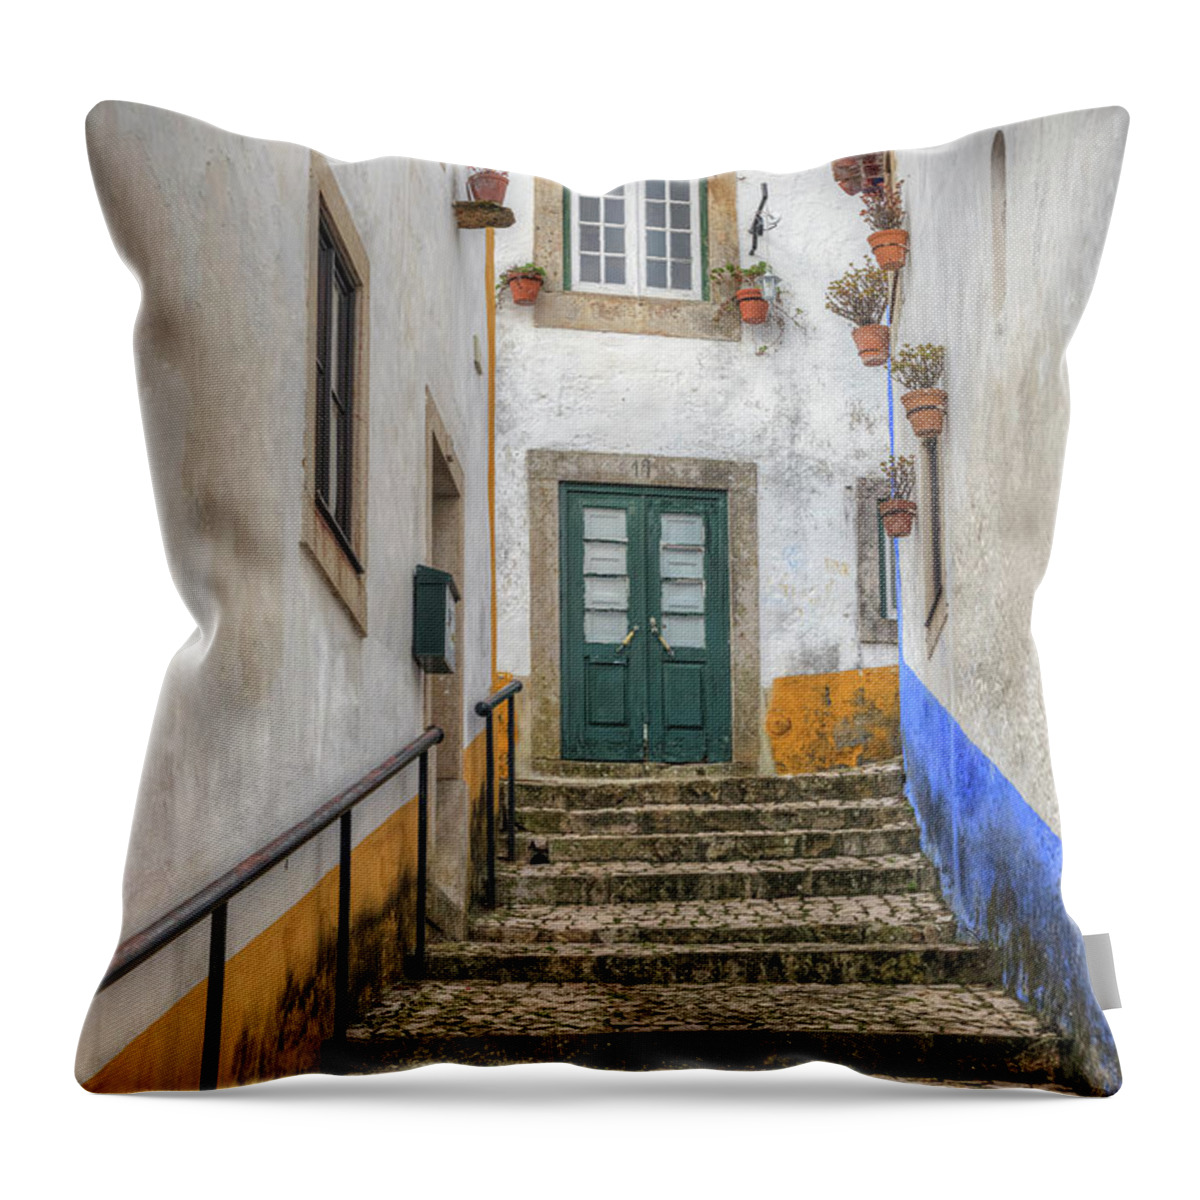 Obidos Throw Pillow featuring the photograph Obidos - Portugal #2 by Joana Kruse